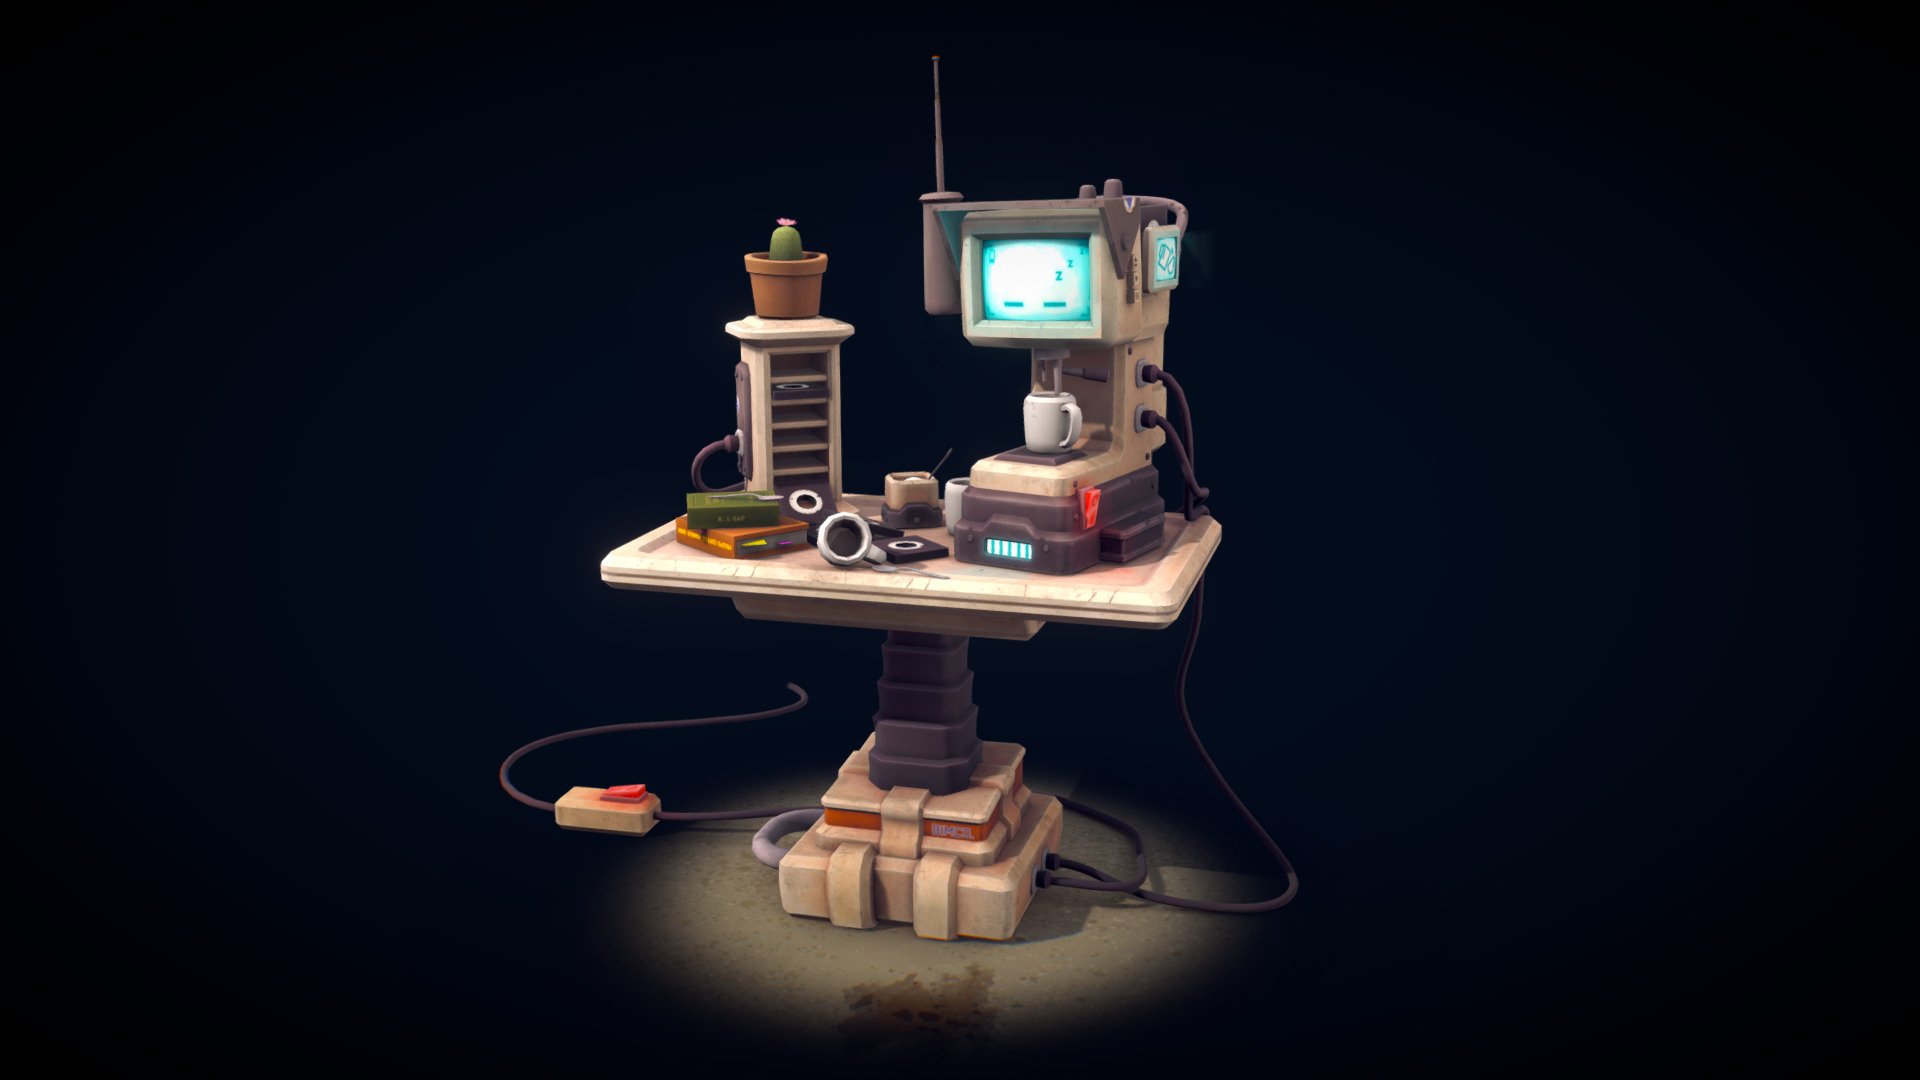 This was created as part of Ashleigh Warners' &lsquo;Creating Stylized Game Assets' course available through CGMA. I completed my first draft last November, but I went back over it and made as many changes as possible to get it to a place I felt confident in sharing.

This is MEEPO, or the Mega Express Espresso Processing Operator 3000. The initial idea was to have this retro-futuristic coffee-station diorama that sold a particular kind of mundane story (even if it was in a sort of space-setting).

Either way, this is my first fully-completed hand-painted project and I couldn't be happier! It was created through a mix of Blender, 3Ds Max, 3D Coat, Substance Painter and Photoshop!

You can check out more screenshots and concepts for it here - https://www.artstation.com/artwork/nYbYvK !

Thanks for taking the time to have a look over it! - CGMA - Coffee Machine - (Sci Fi Prop) - 3D model by rp3d_ 3d model